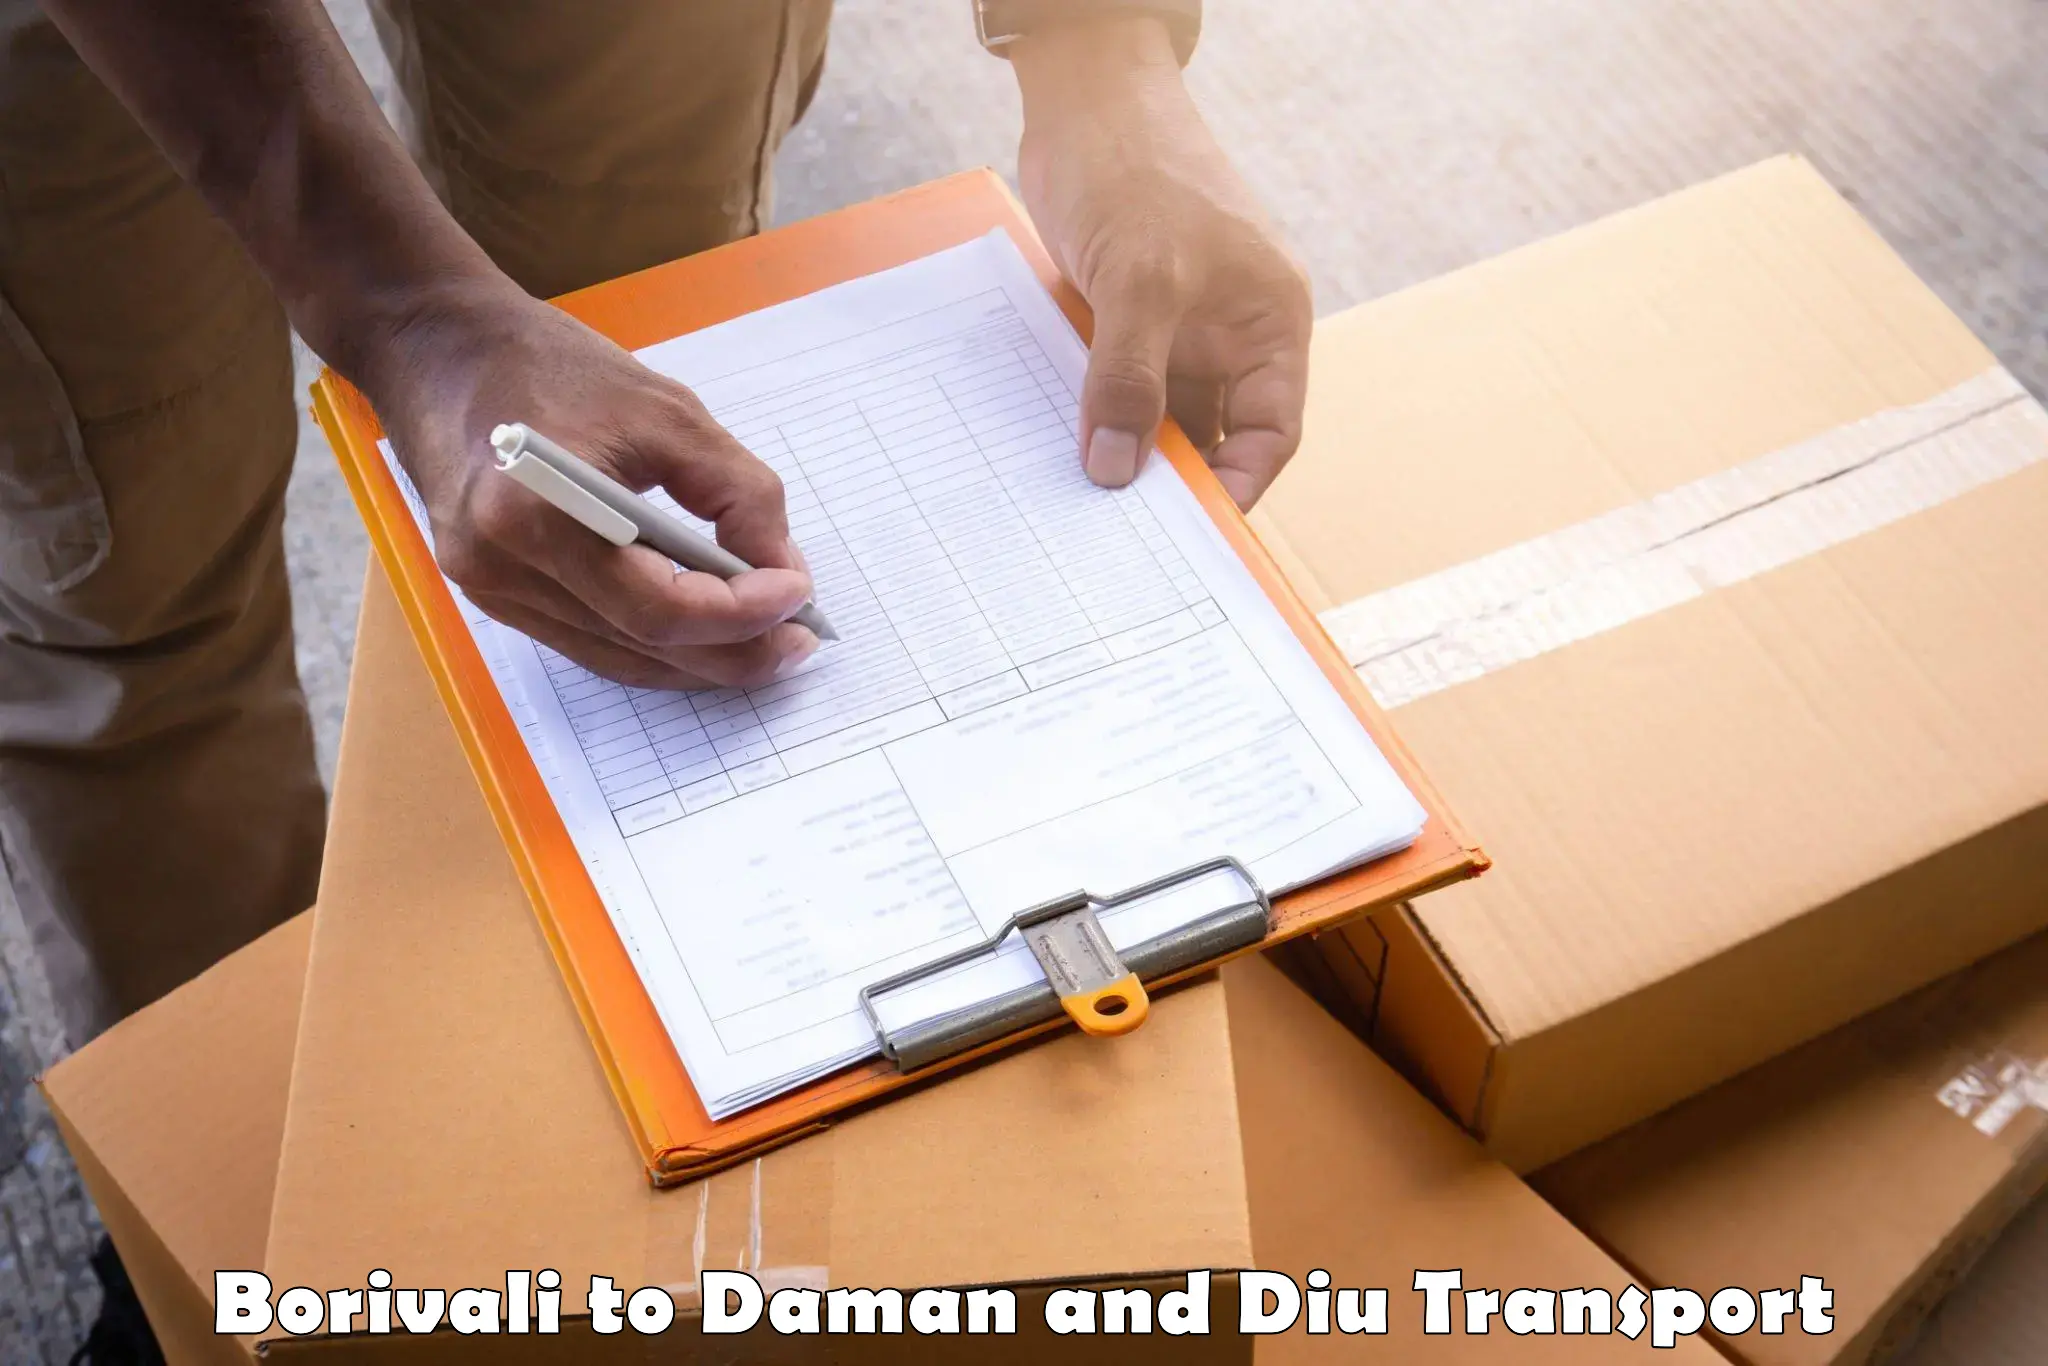 Commercial transport service Borivali to Daman and Diu